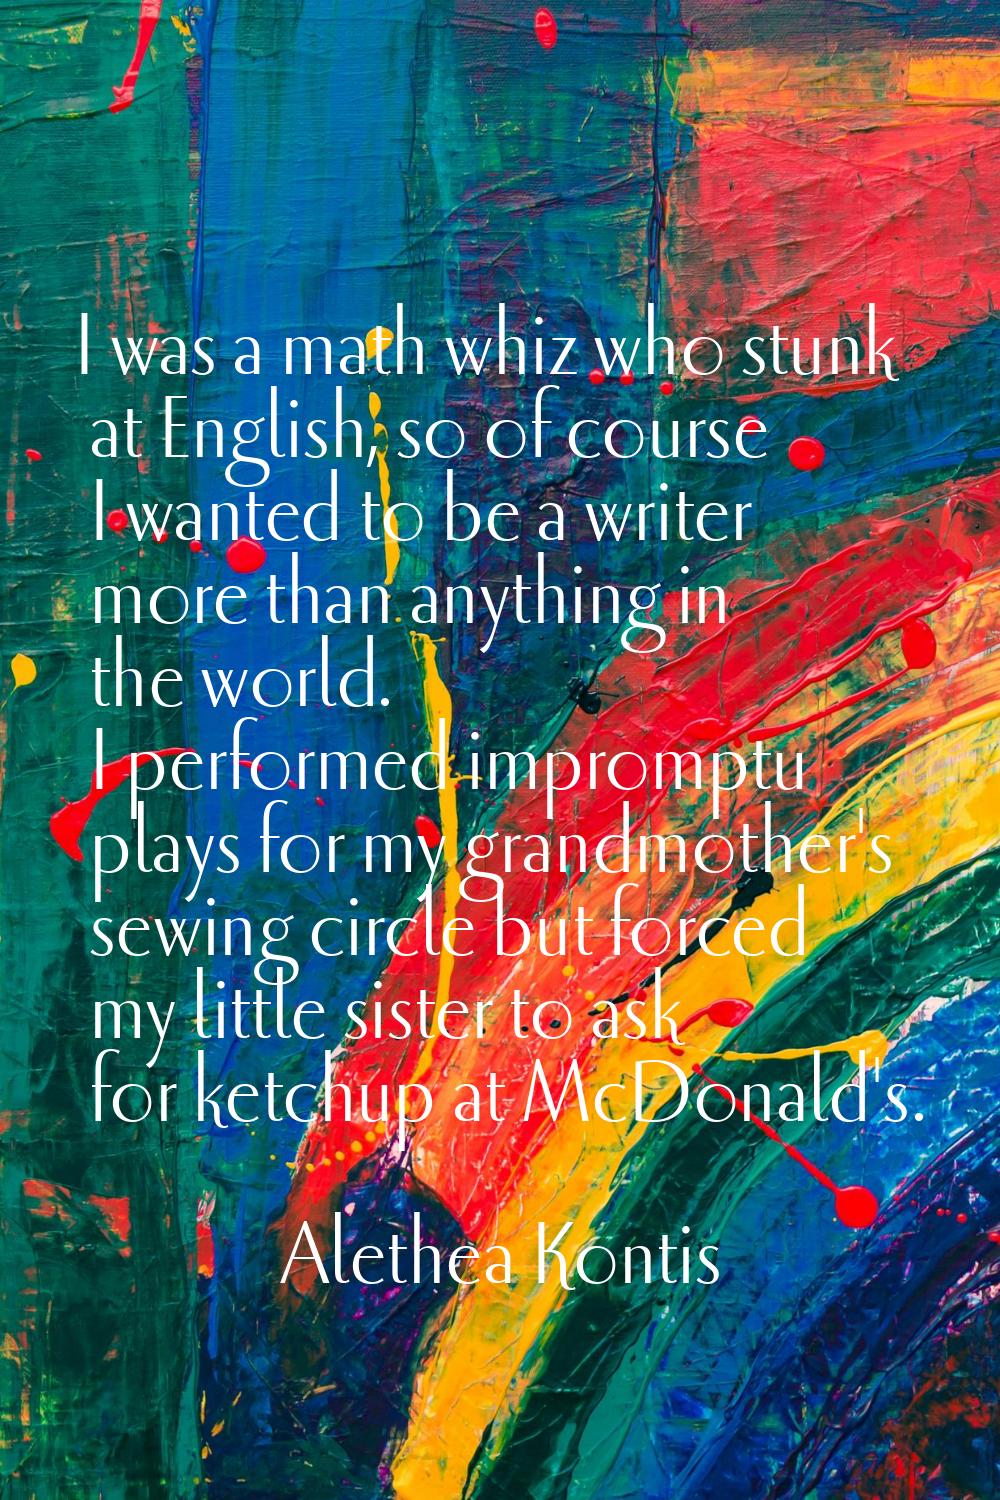 I was a math whiz who stunk at English, so of course I wanted to be a writer more than anything in 